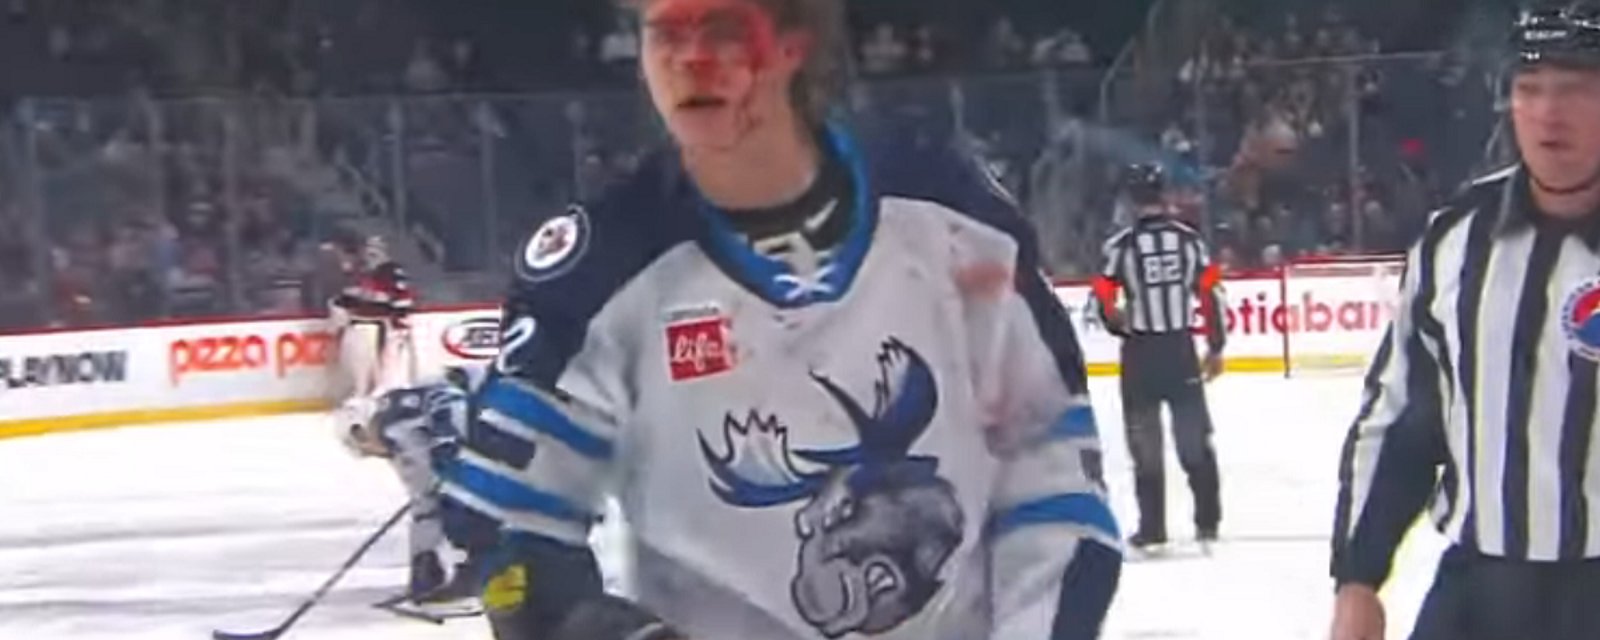 Boko Imama rearranges Tyrel Bauer's face on the ice.